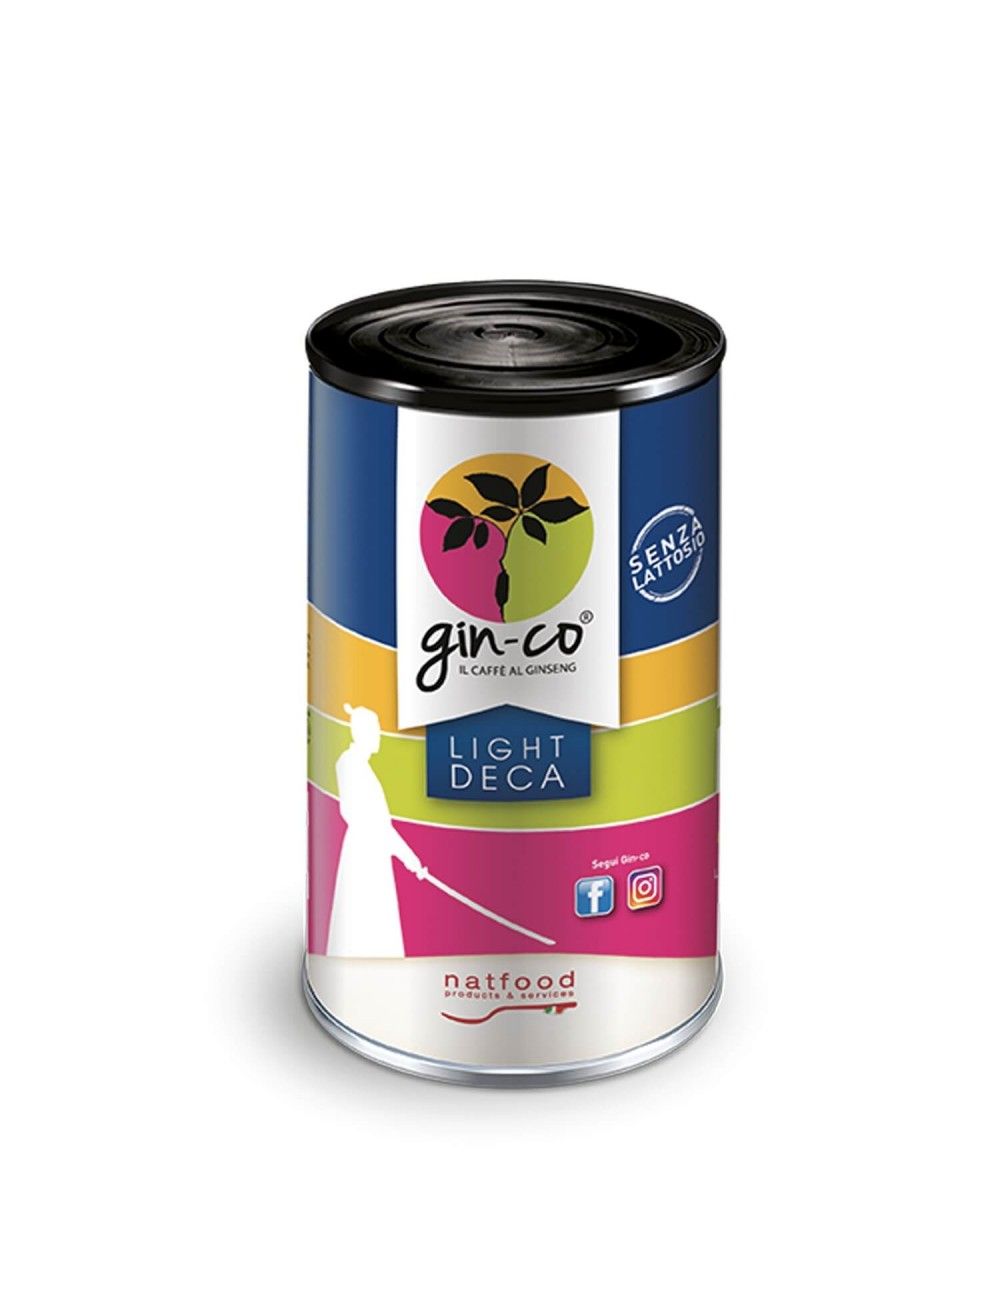 GINCO LIGHT DECA 500 g can. Natfood